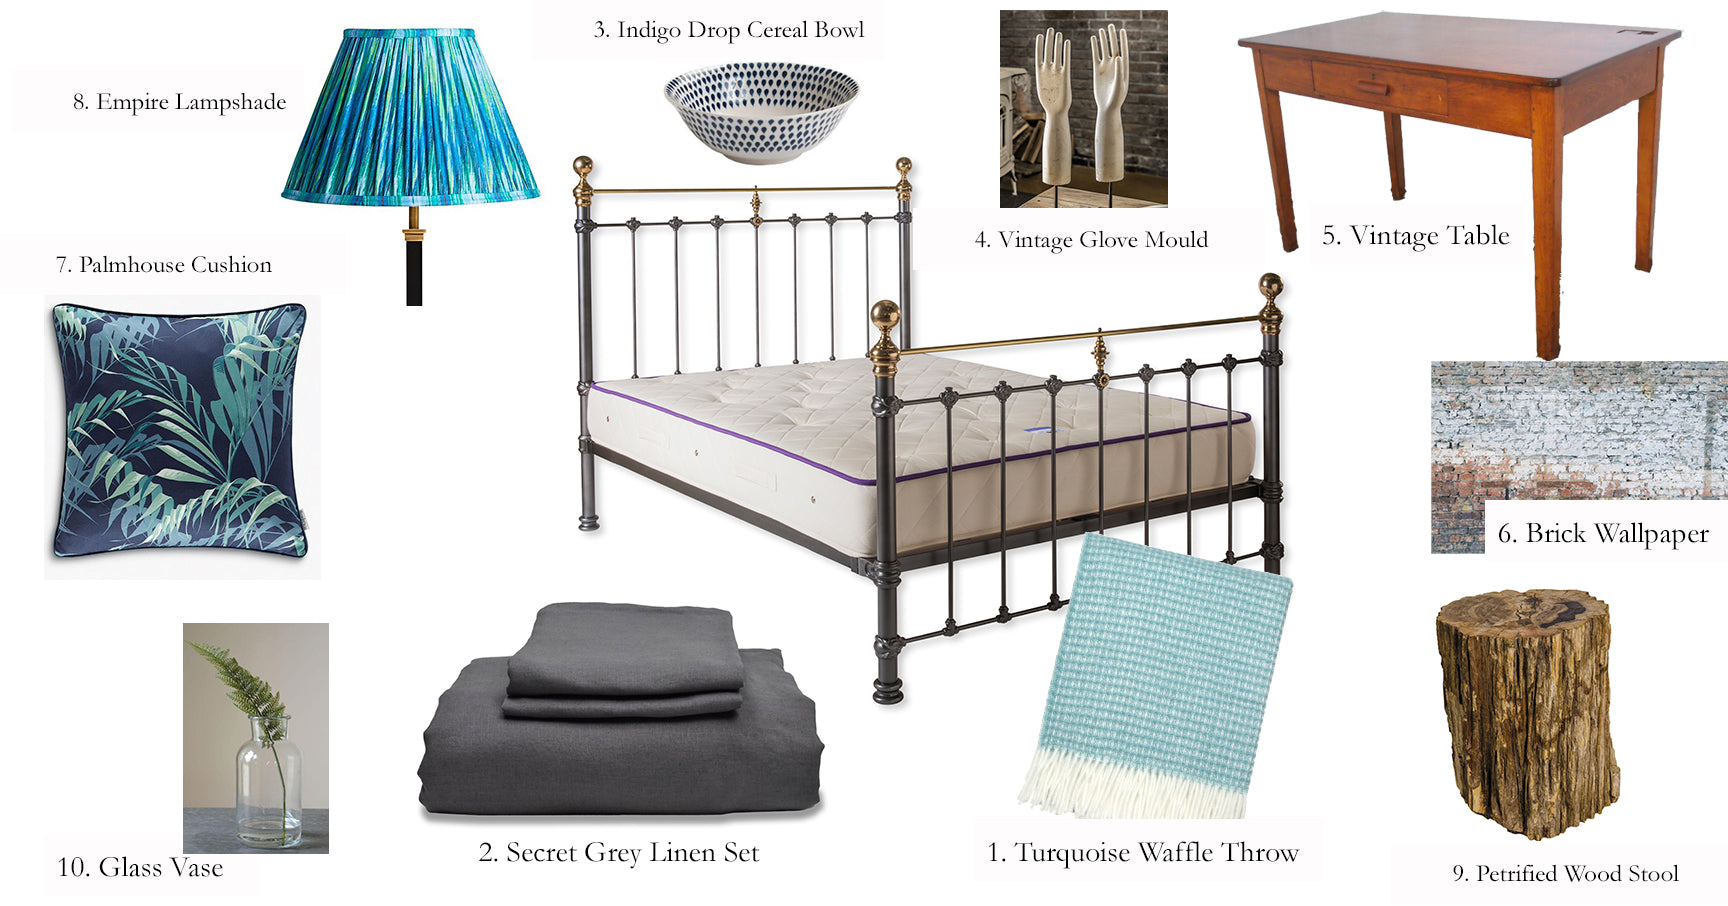 10 Items To Create A New York Loft Style Bedroom | The Cornish Bed Company Blog